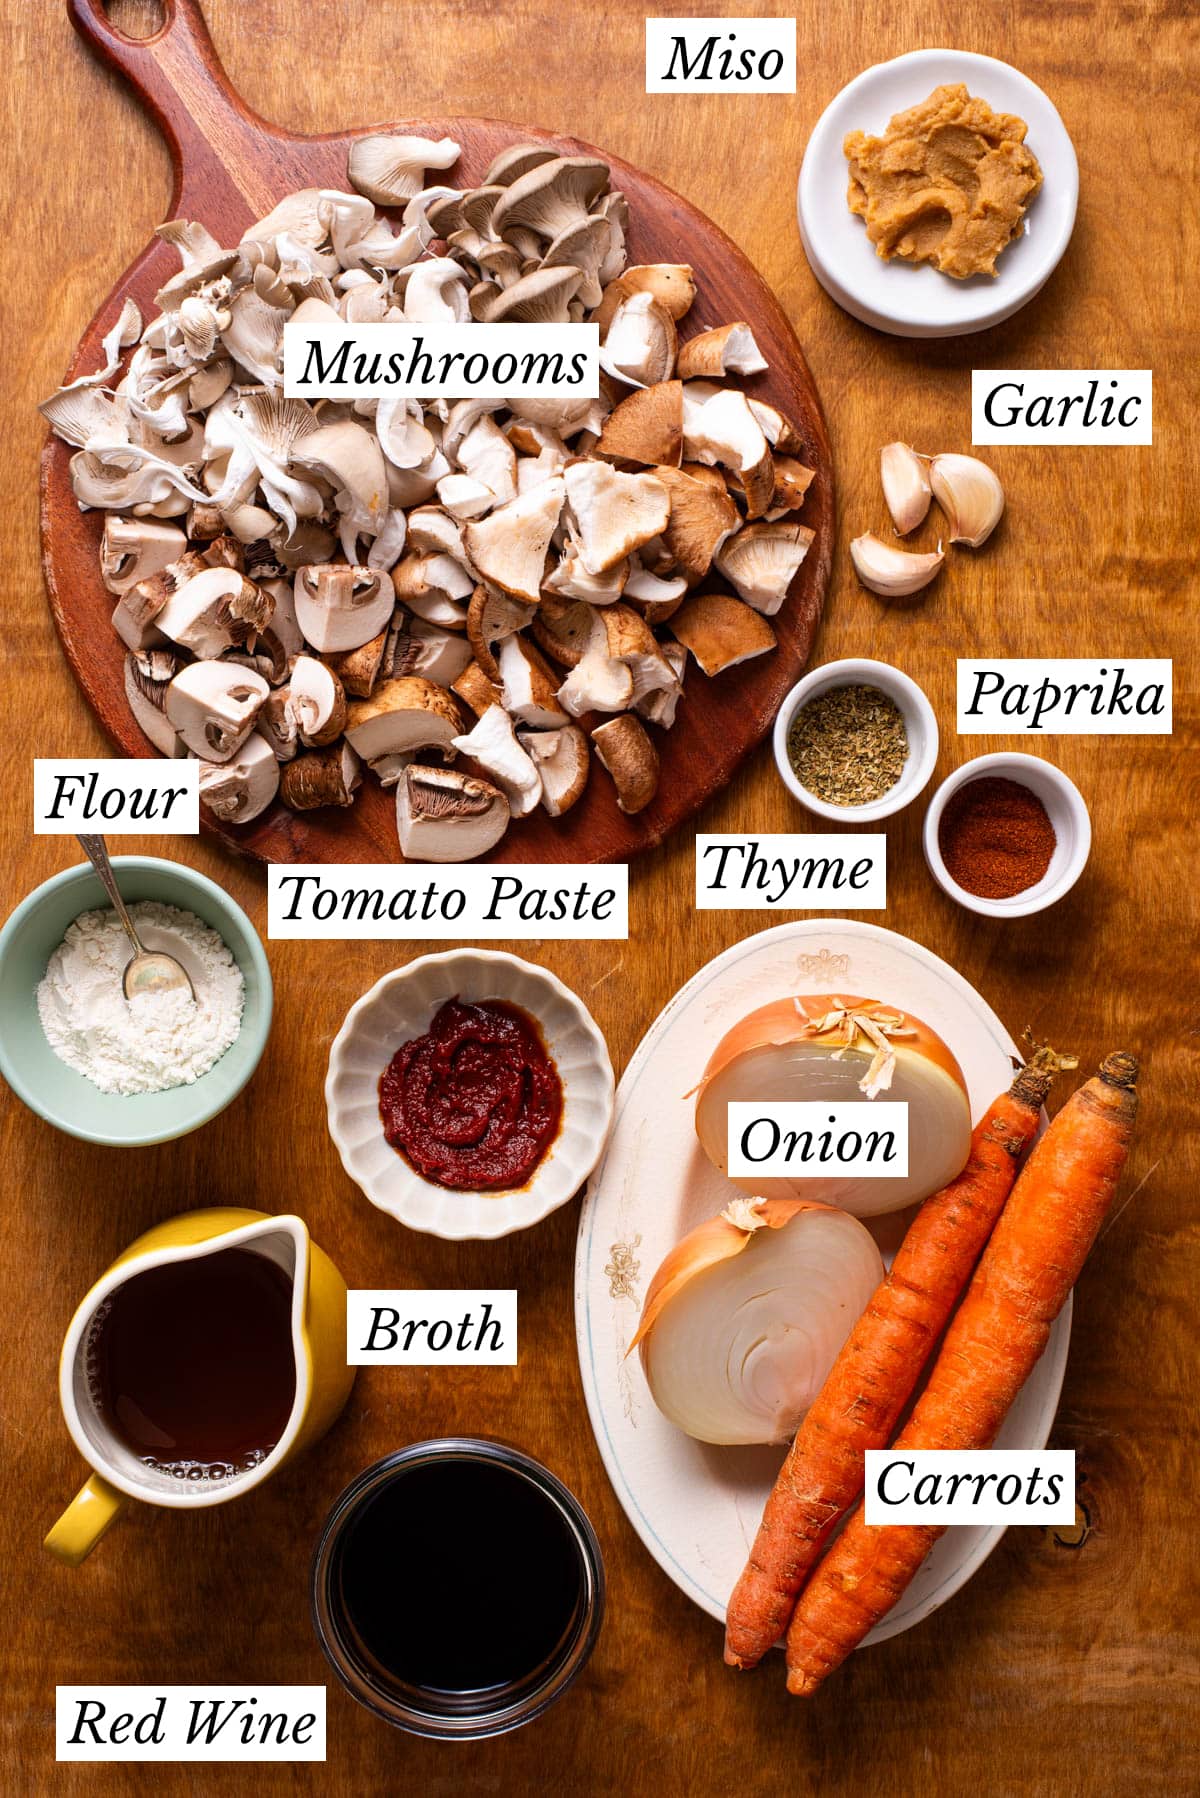 Ingredients to make mushroom bourguignon gathered on a wooden table.